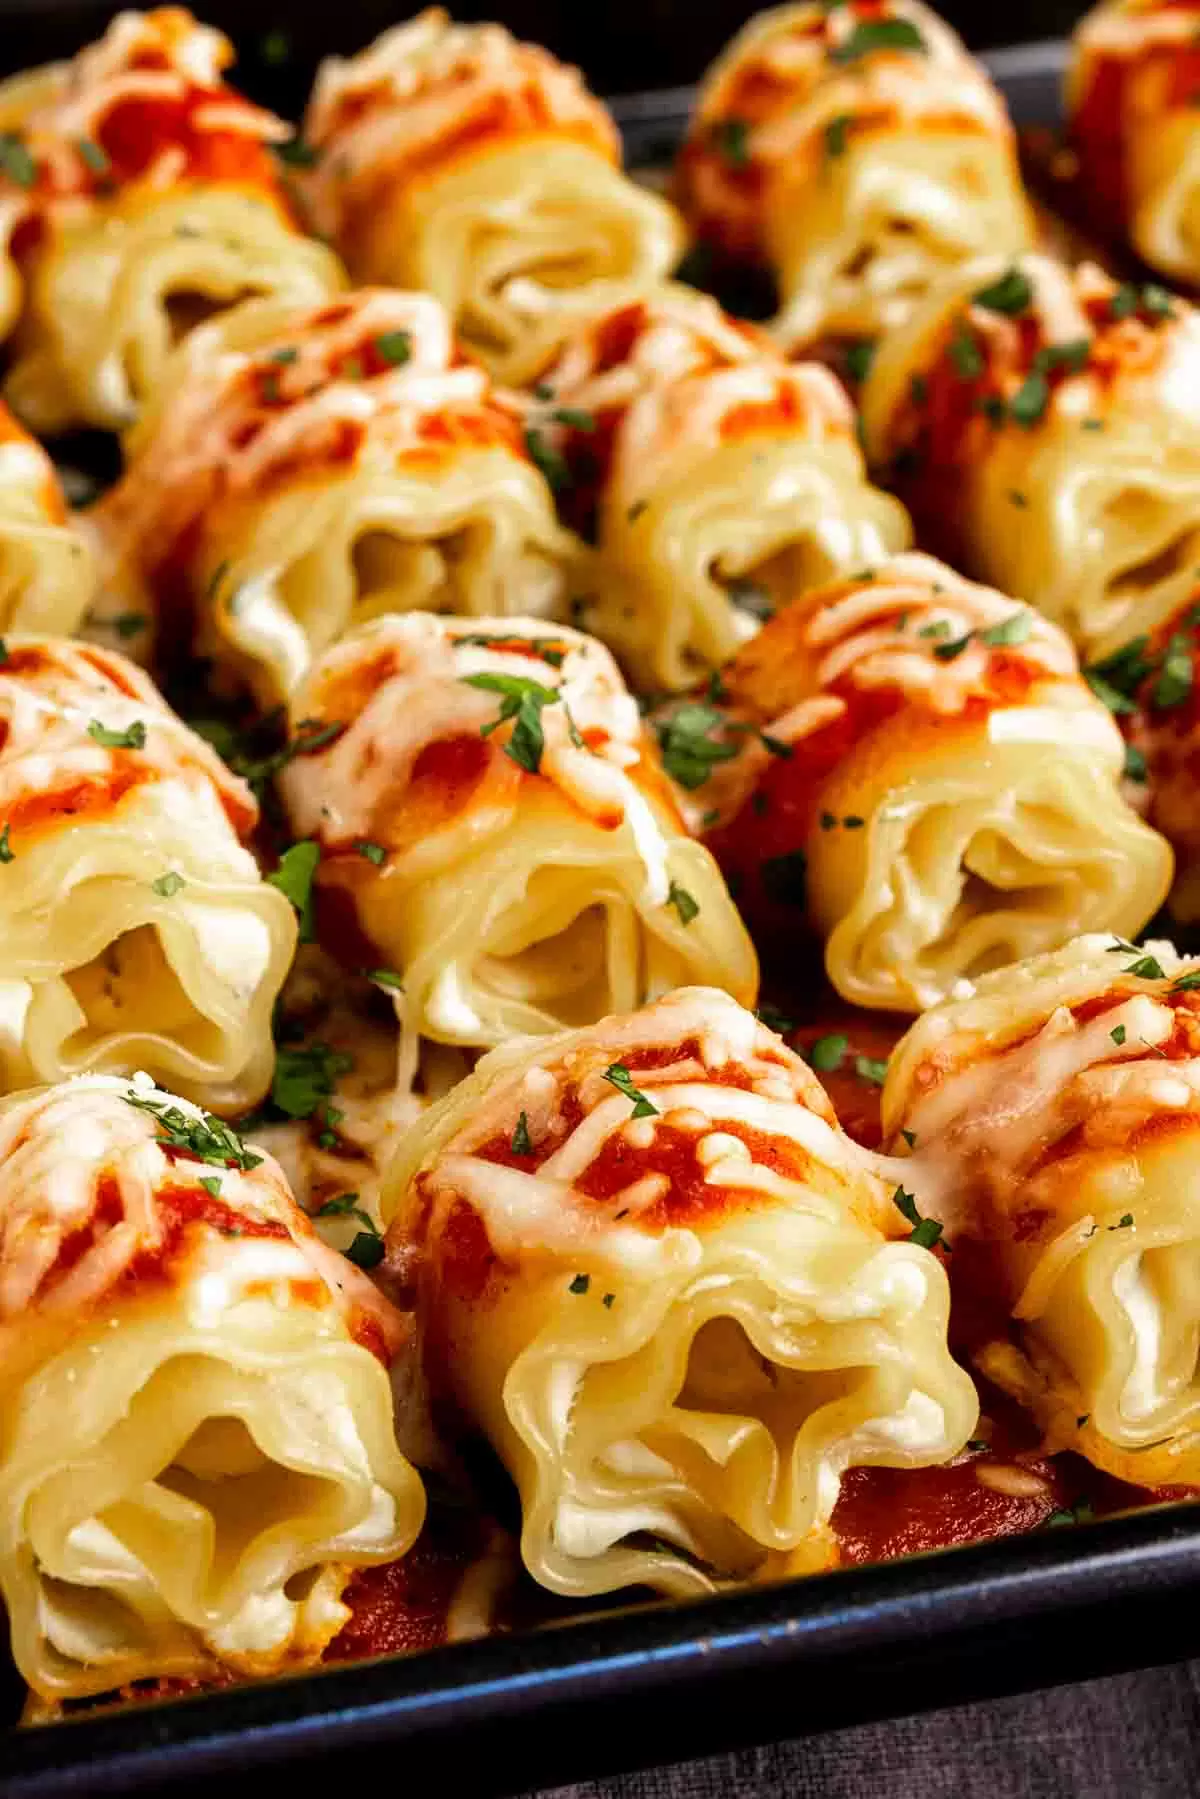 A tray of Mini lasagna appetizers with sauce and parmesan cheese.